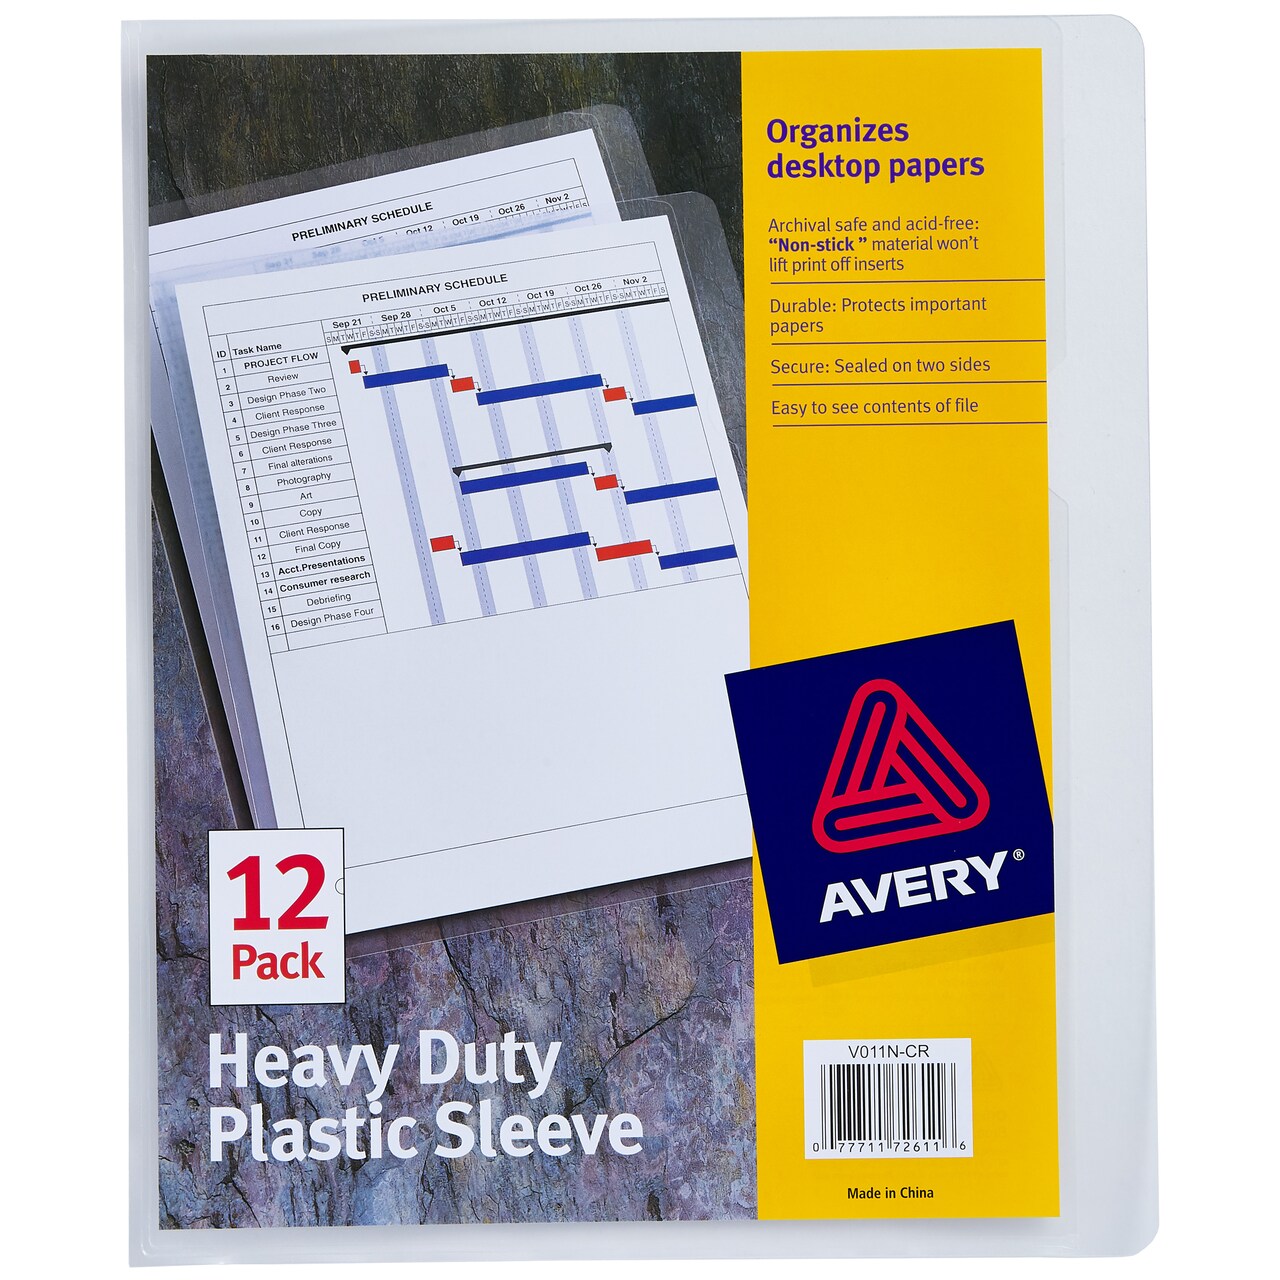 Avery Heavy Duty Plastic Document Sleeves, Holds up to 25 Sheets, 12 Clear Sleeves (72611)